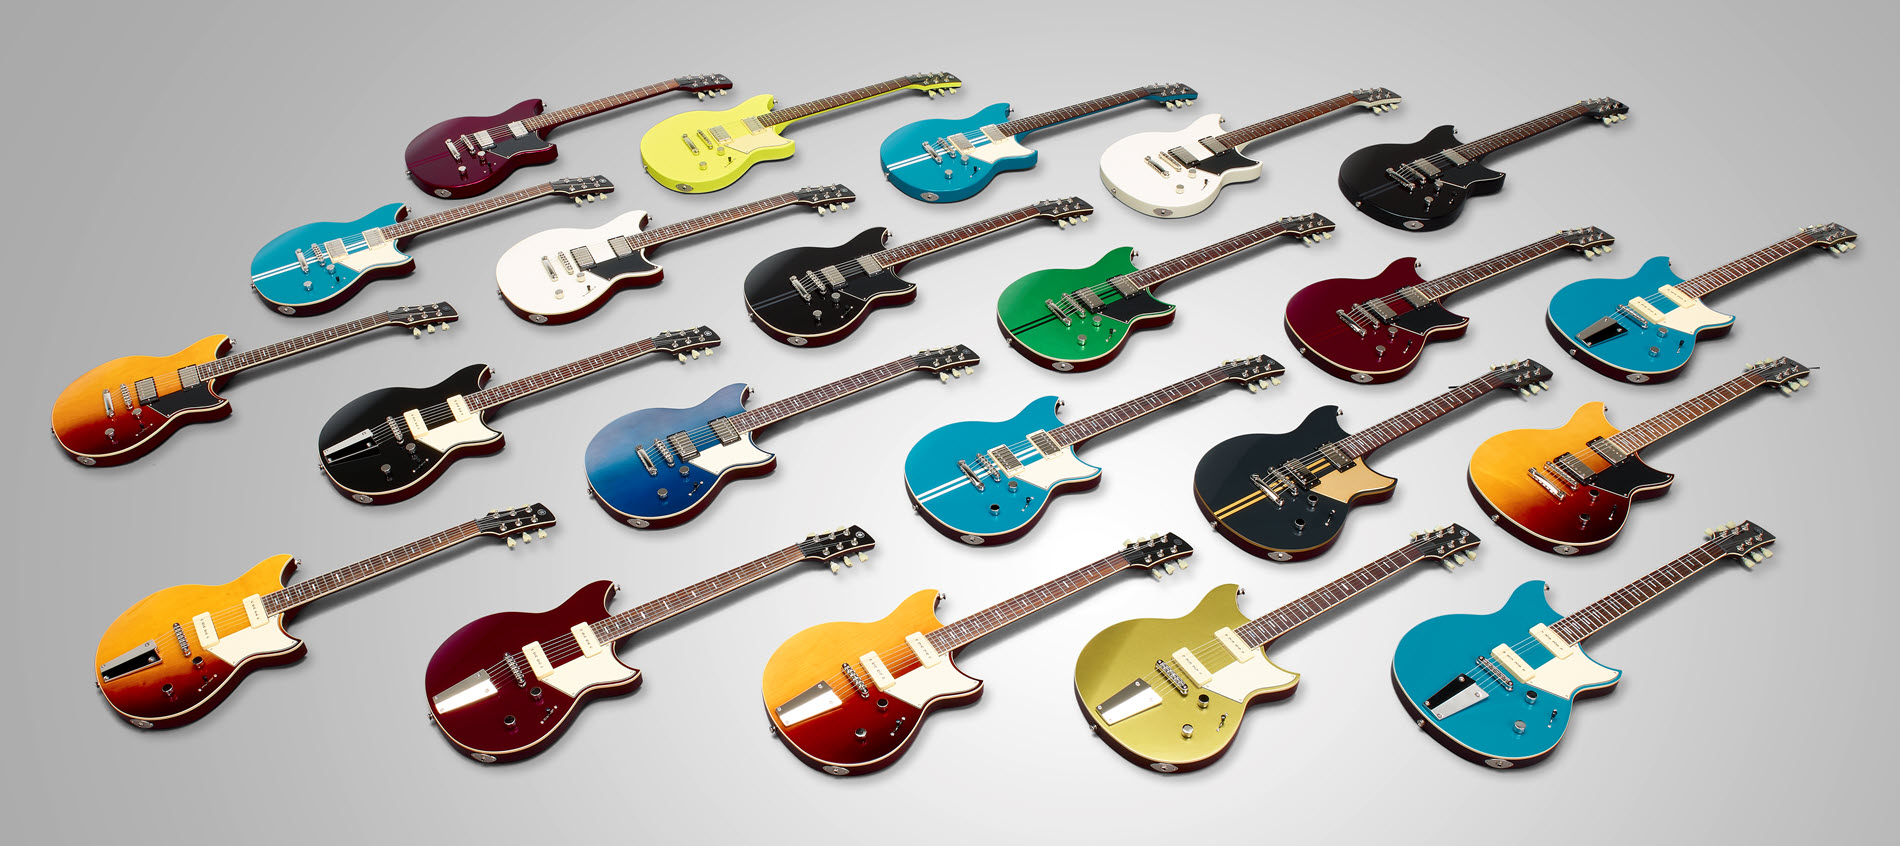 Large array of different colors of electric guitars.